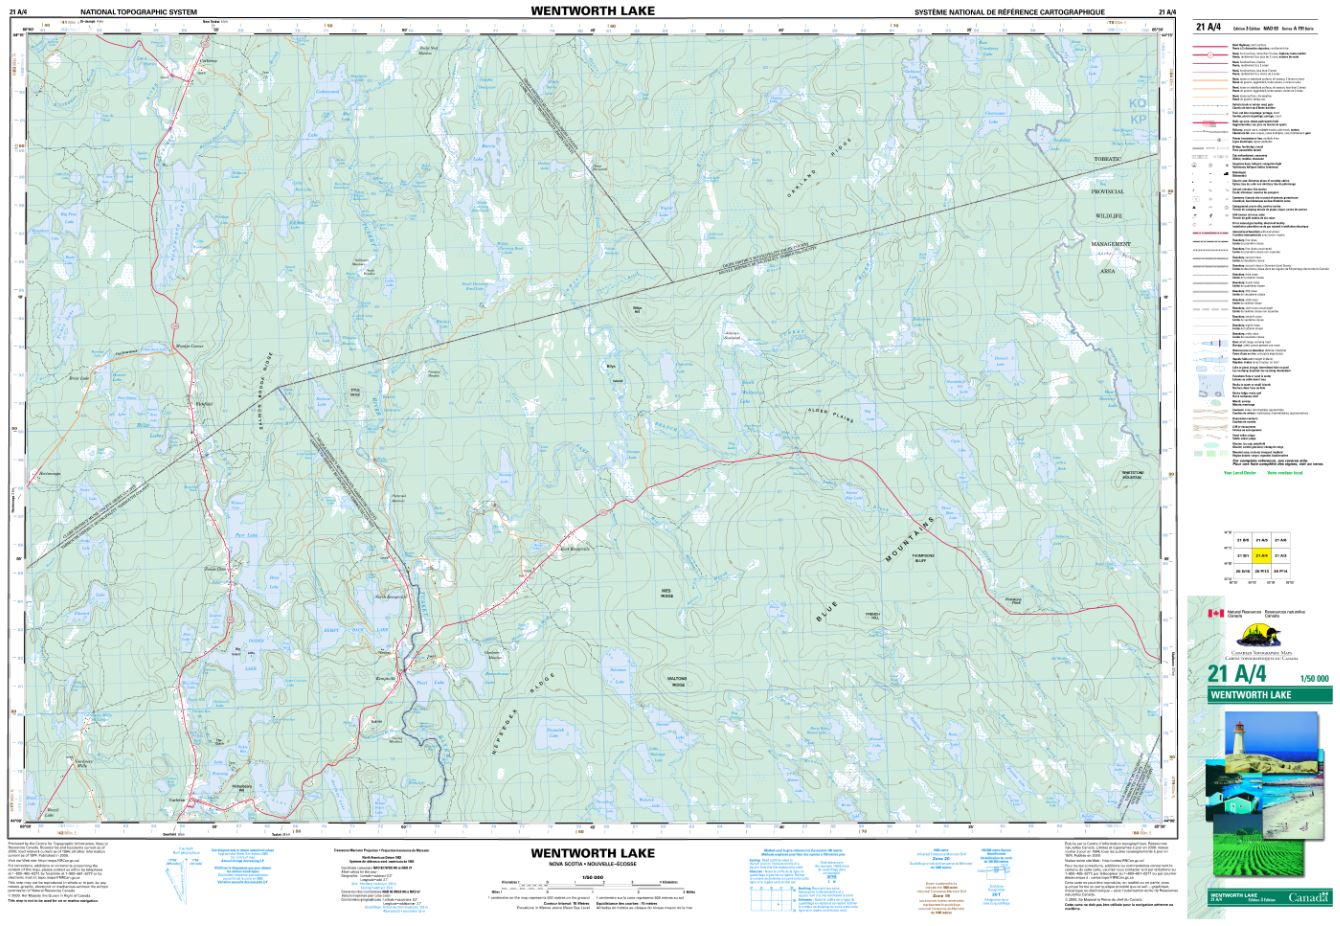 21a04 Wentworth Lake Topographic Map Nova Scotia Maps And More 6196